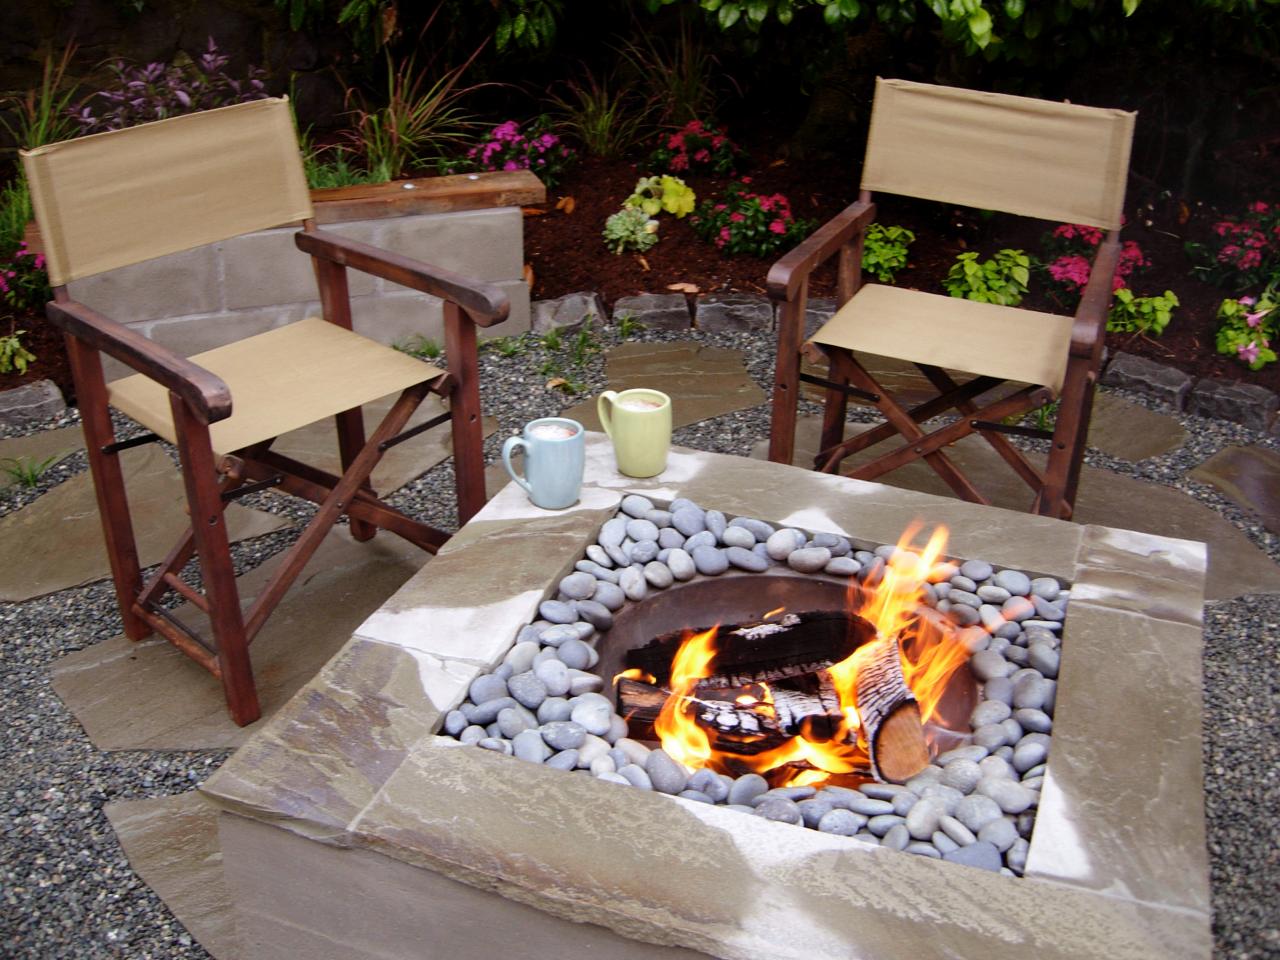 How To Make A Concrete Fire Feature, What To Put Under A Fire Pit On Concrete